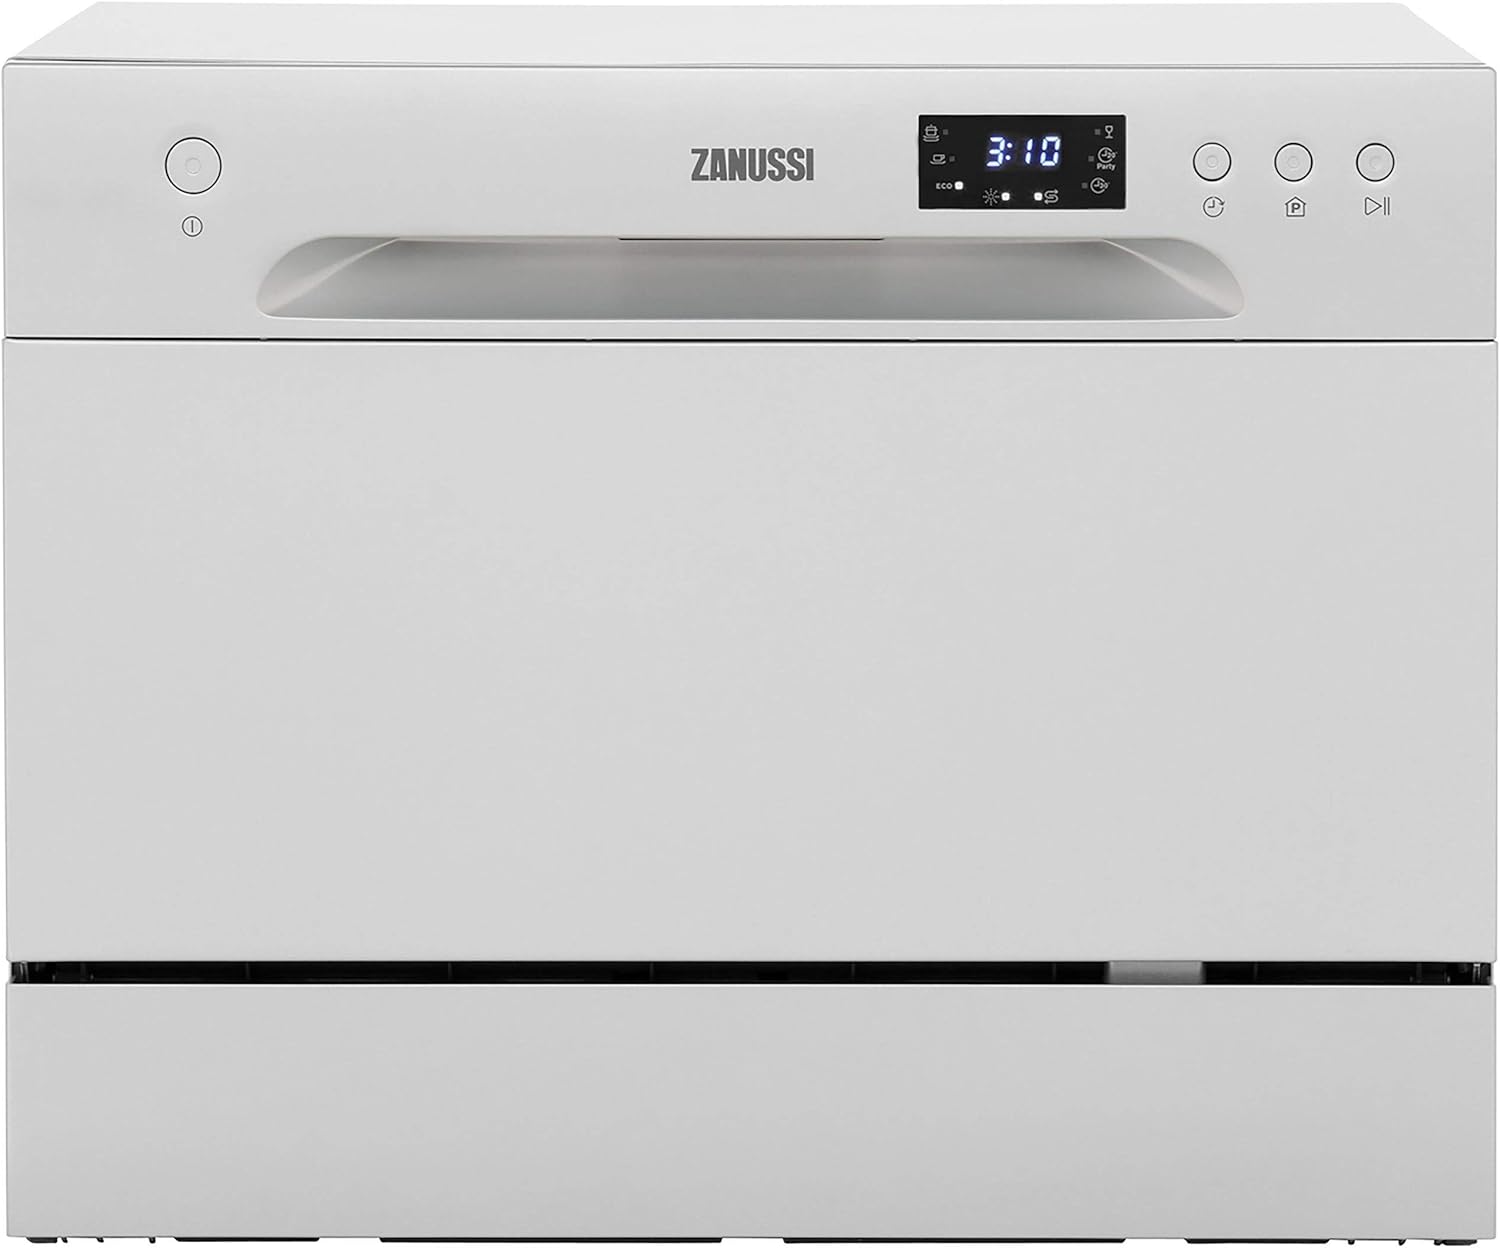 Zanussi ZDM17301SA Freestanding Counter Top Dishwasher, Compact Dishwasher, 55 cm Width, 6 Place Settings, 6 Programmes, Residual Drying, 52dB, Silver [Energy Class F] - Amazing Gadgets Outlet